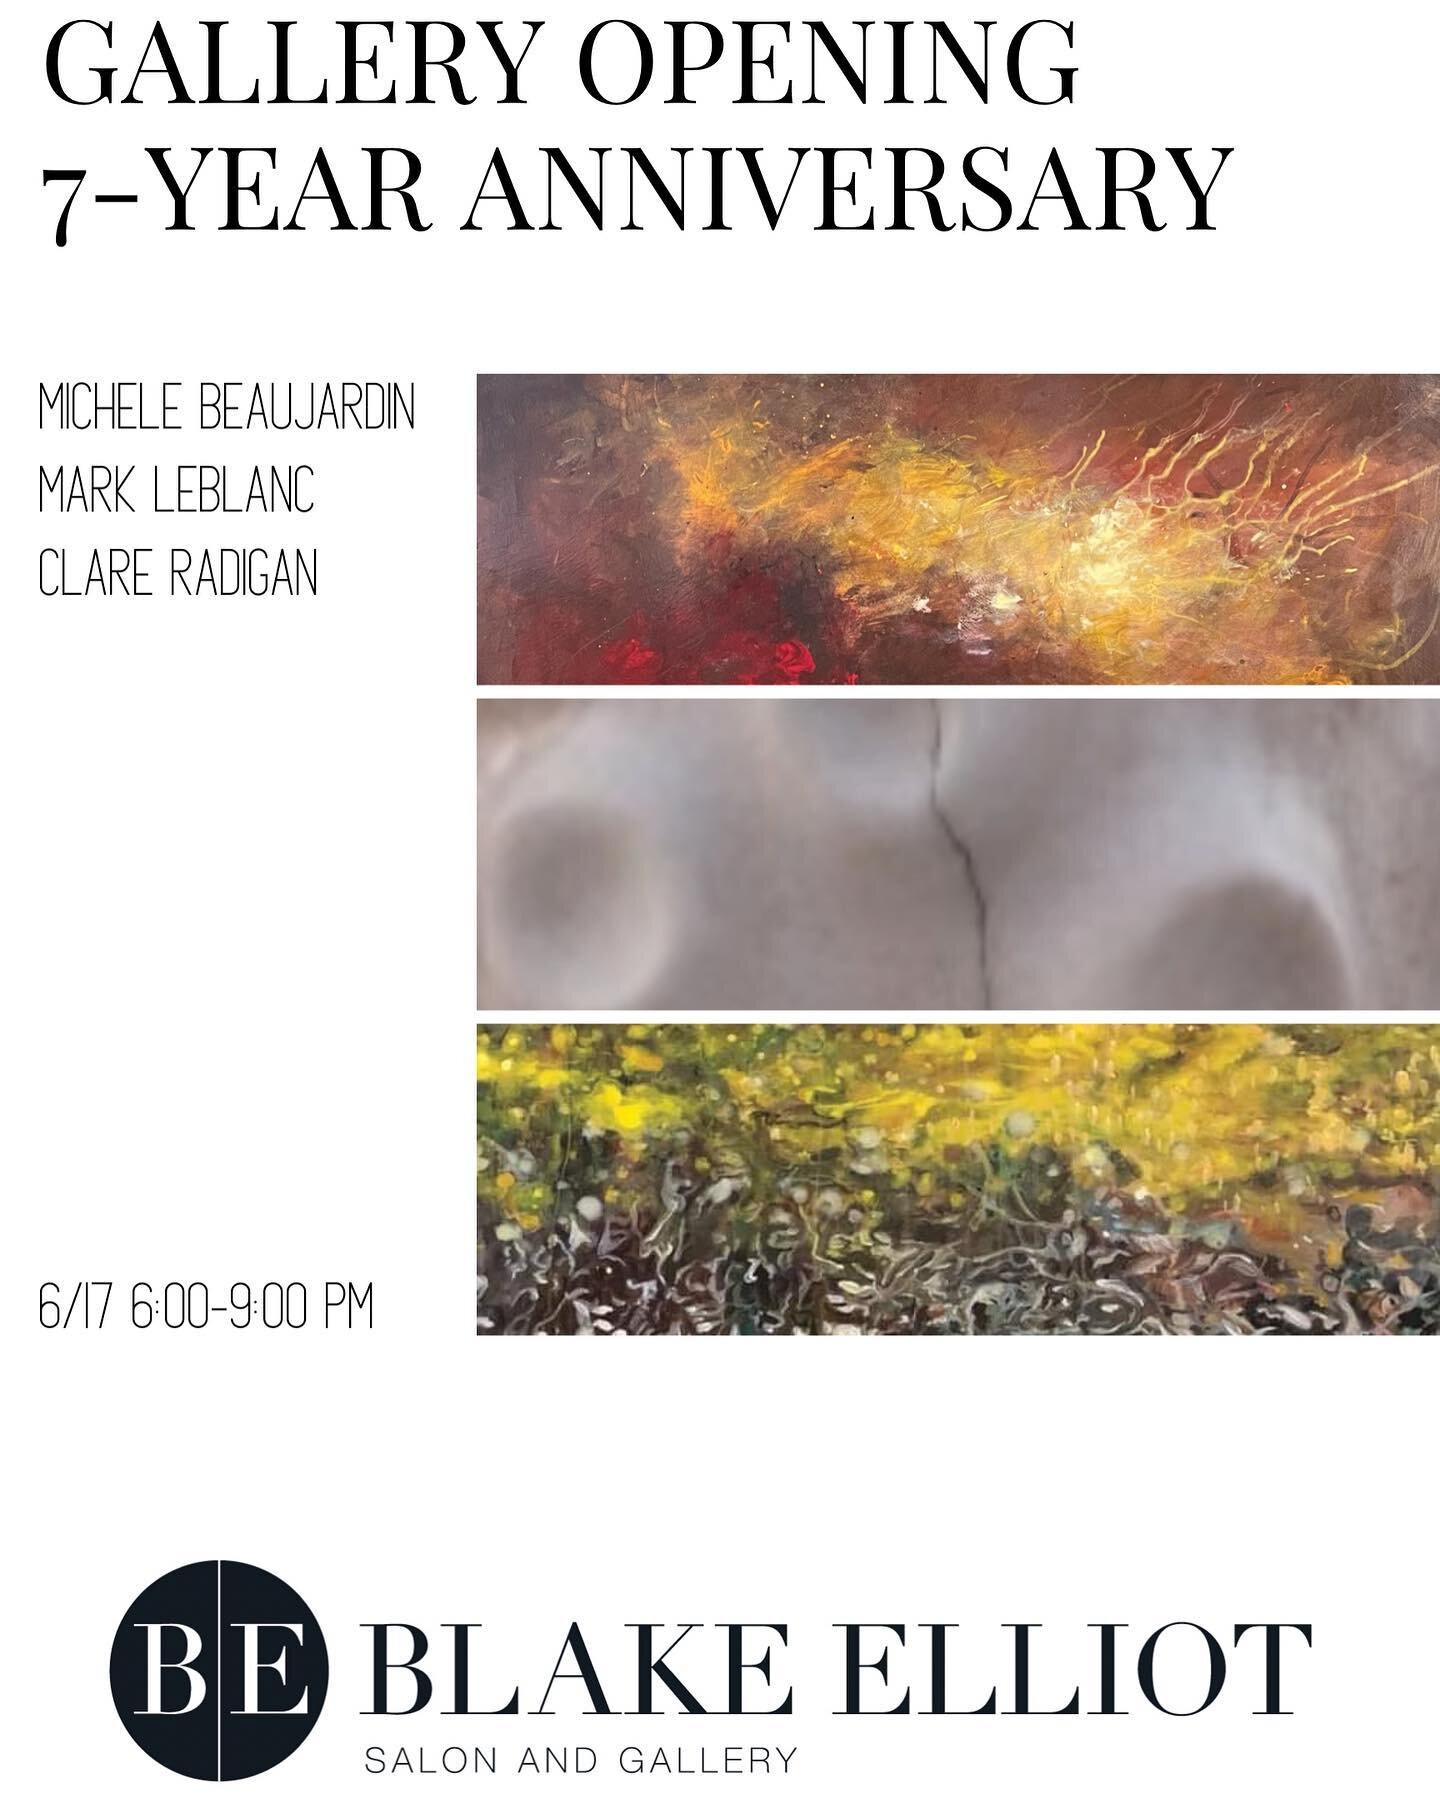 Join us in celebrating our 7-year anniversary with a gallery opening next Friday the 17th from 6-9 pm featuring the work of Michelle Beaujardin, Mark LeBlanc, and Clare Radigan. #blakeelliotsalonandgallery #anniversary #galleryopening